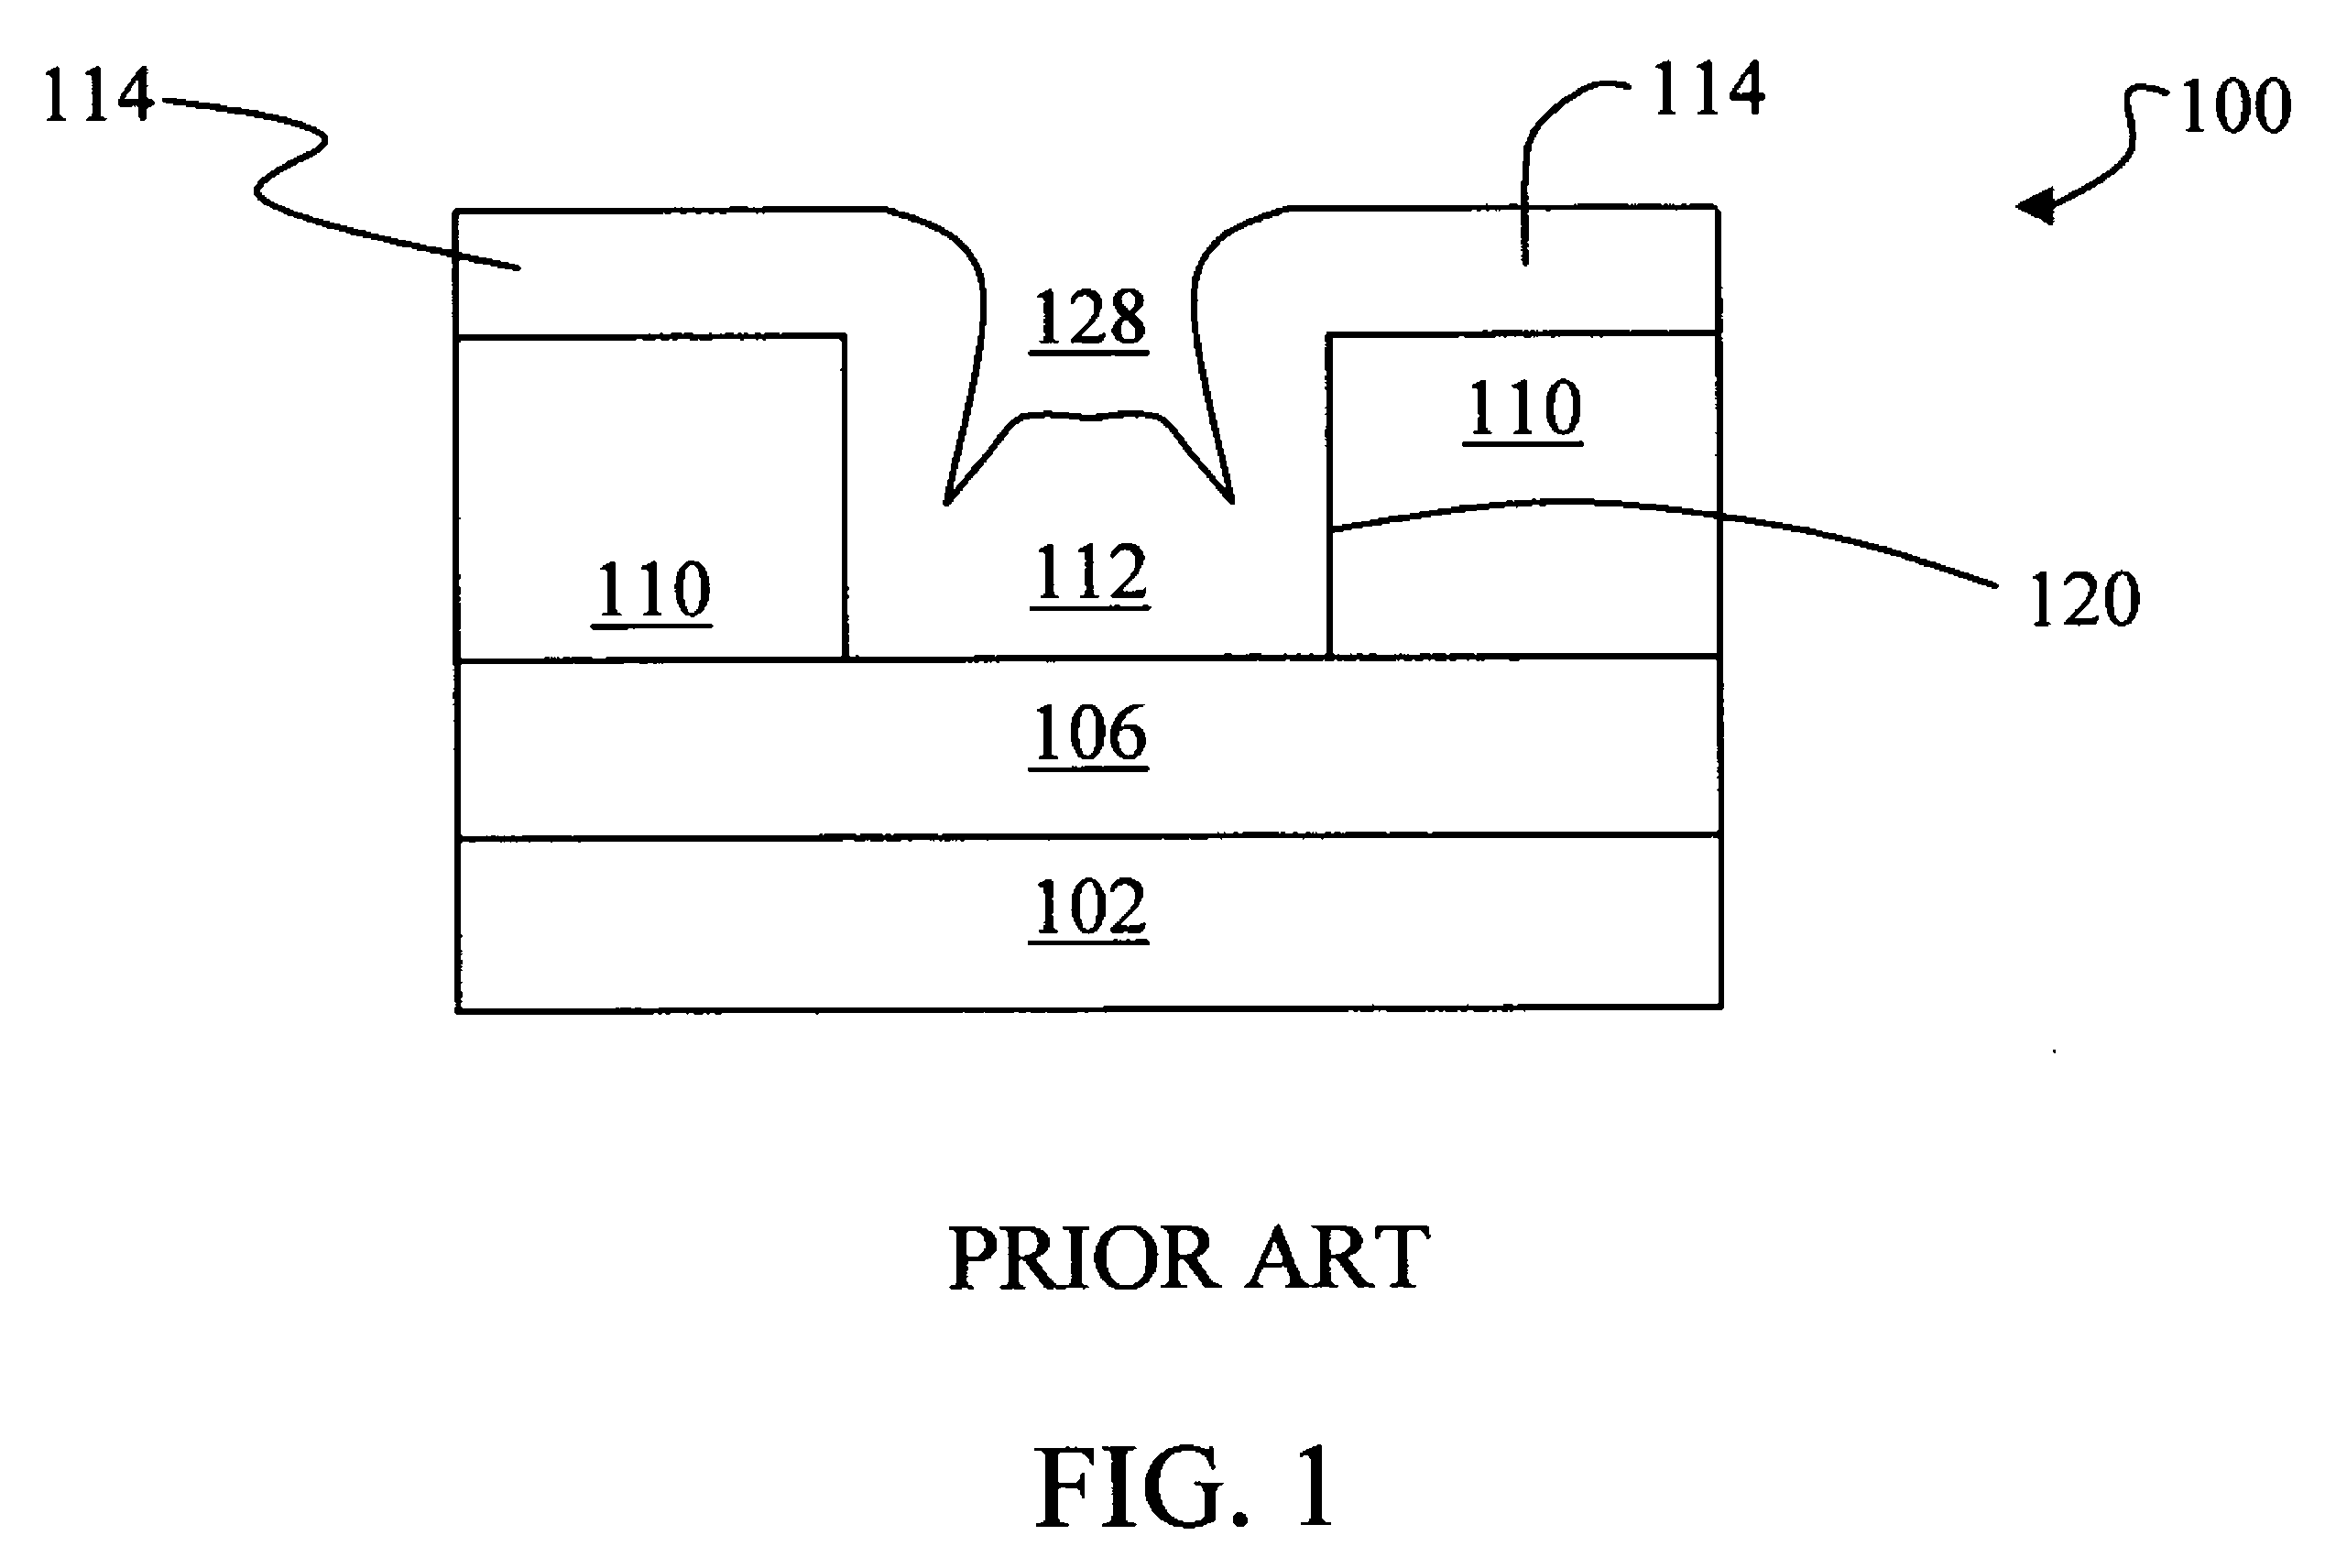 Temperature and pressure control methods to fill features with programmable resistance and switching devices